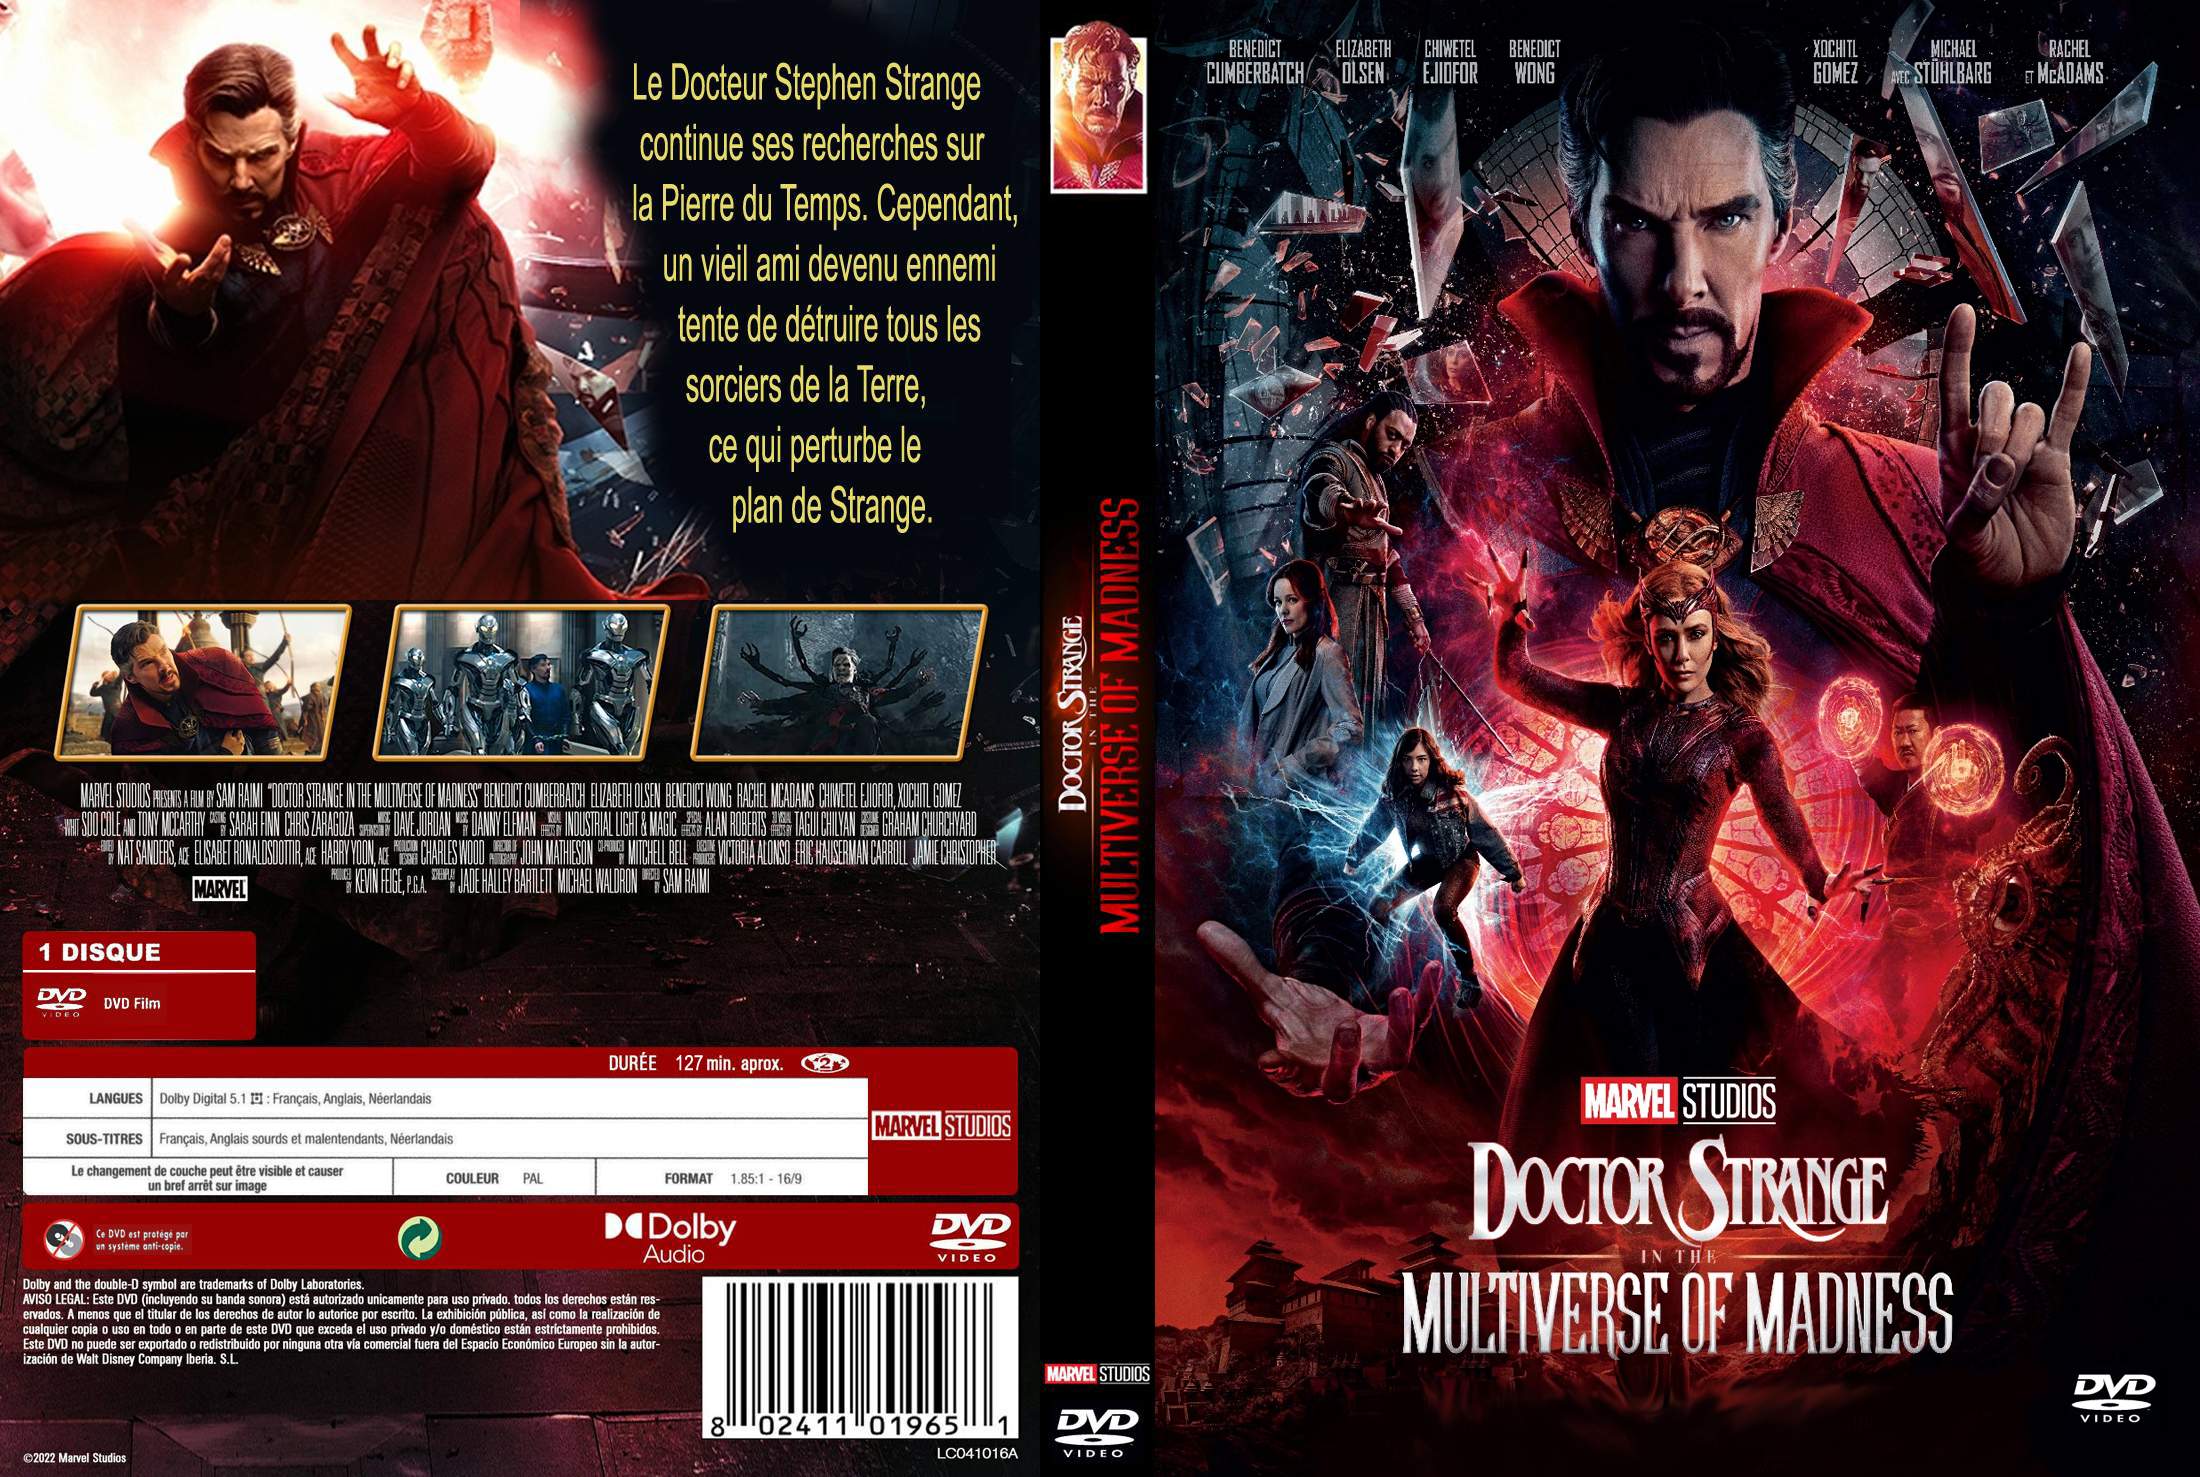 Jaquette DVD Doctor Strange in the Multiverse of Madness custom